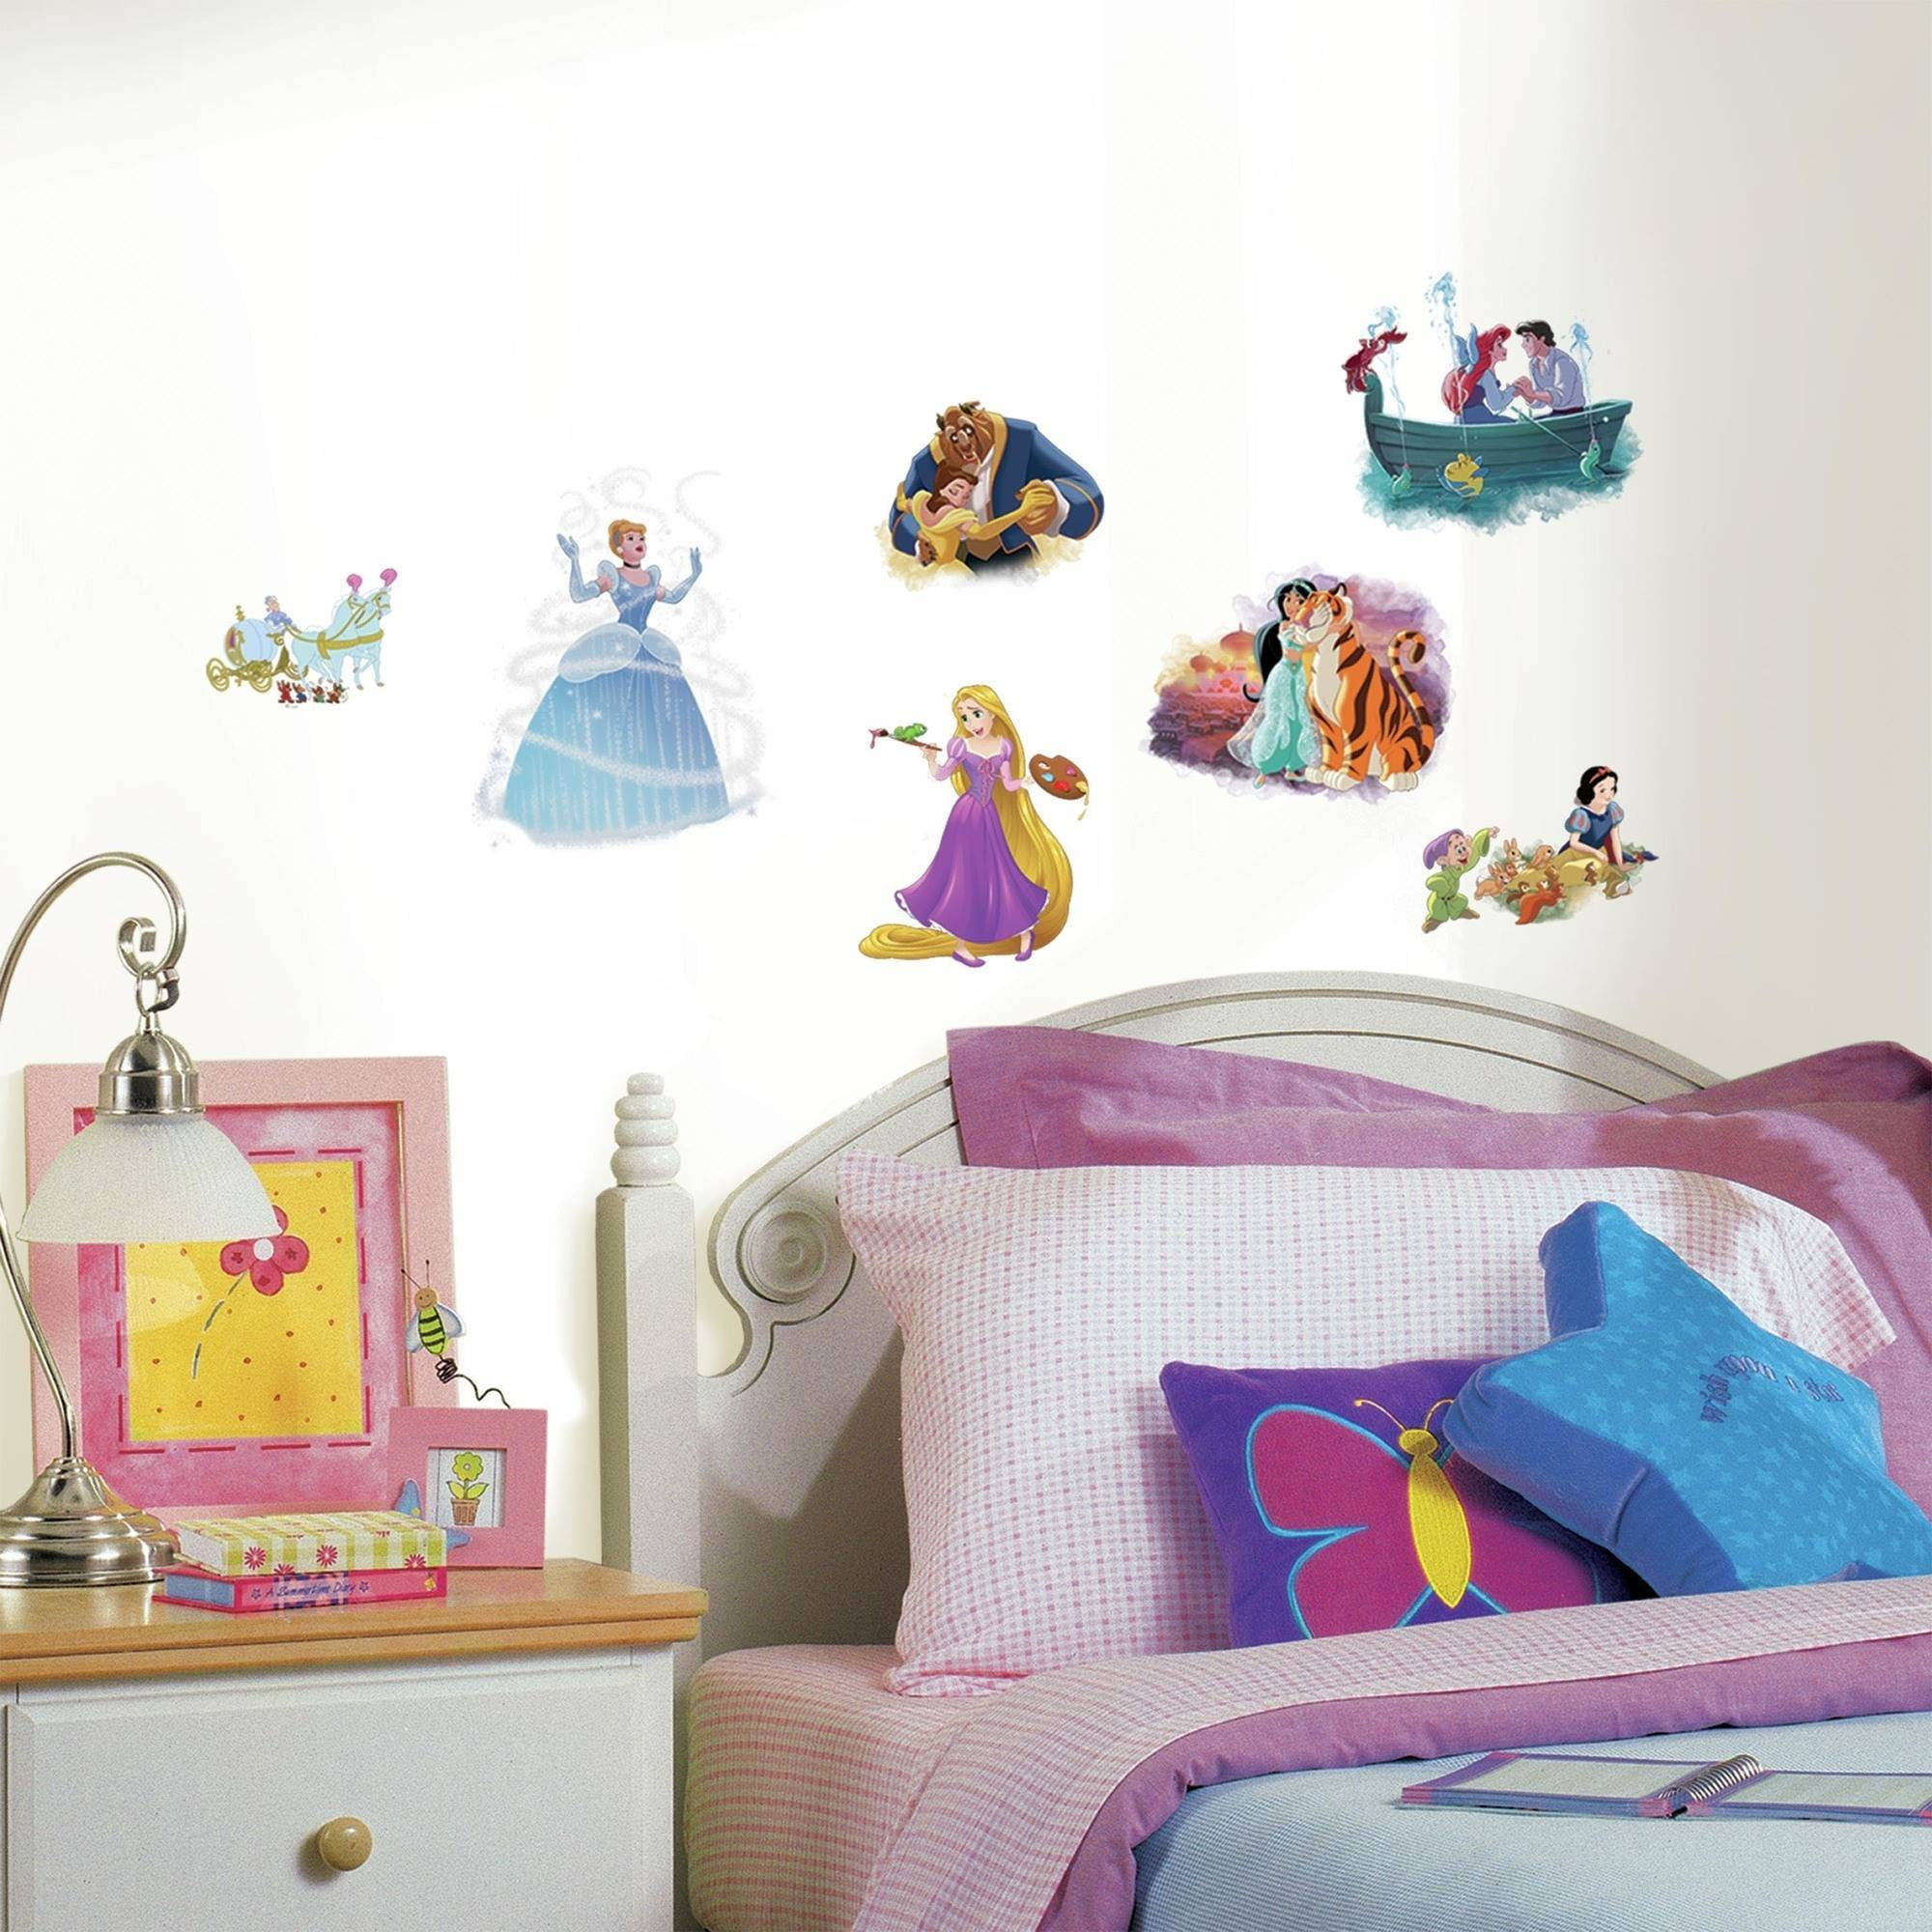 Roommates Sofia the First Peel and Stick Wall Decal Appliques 